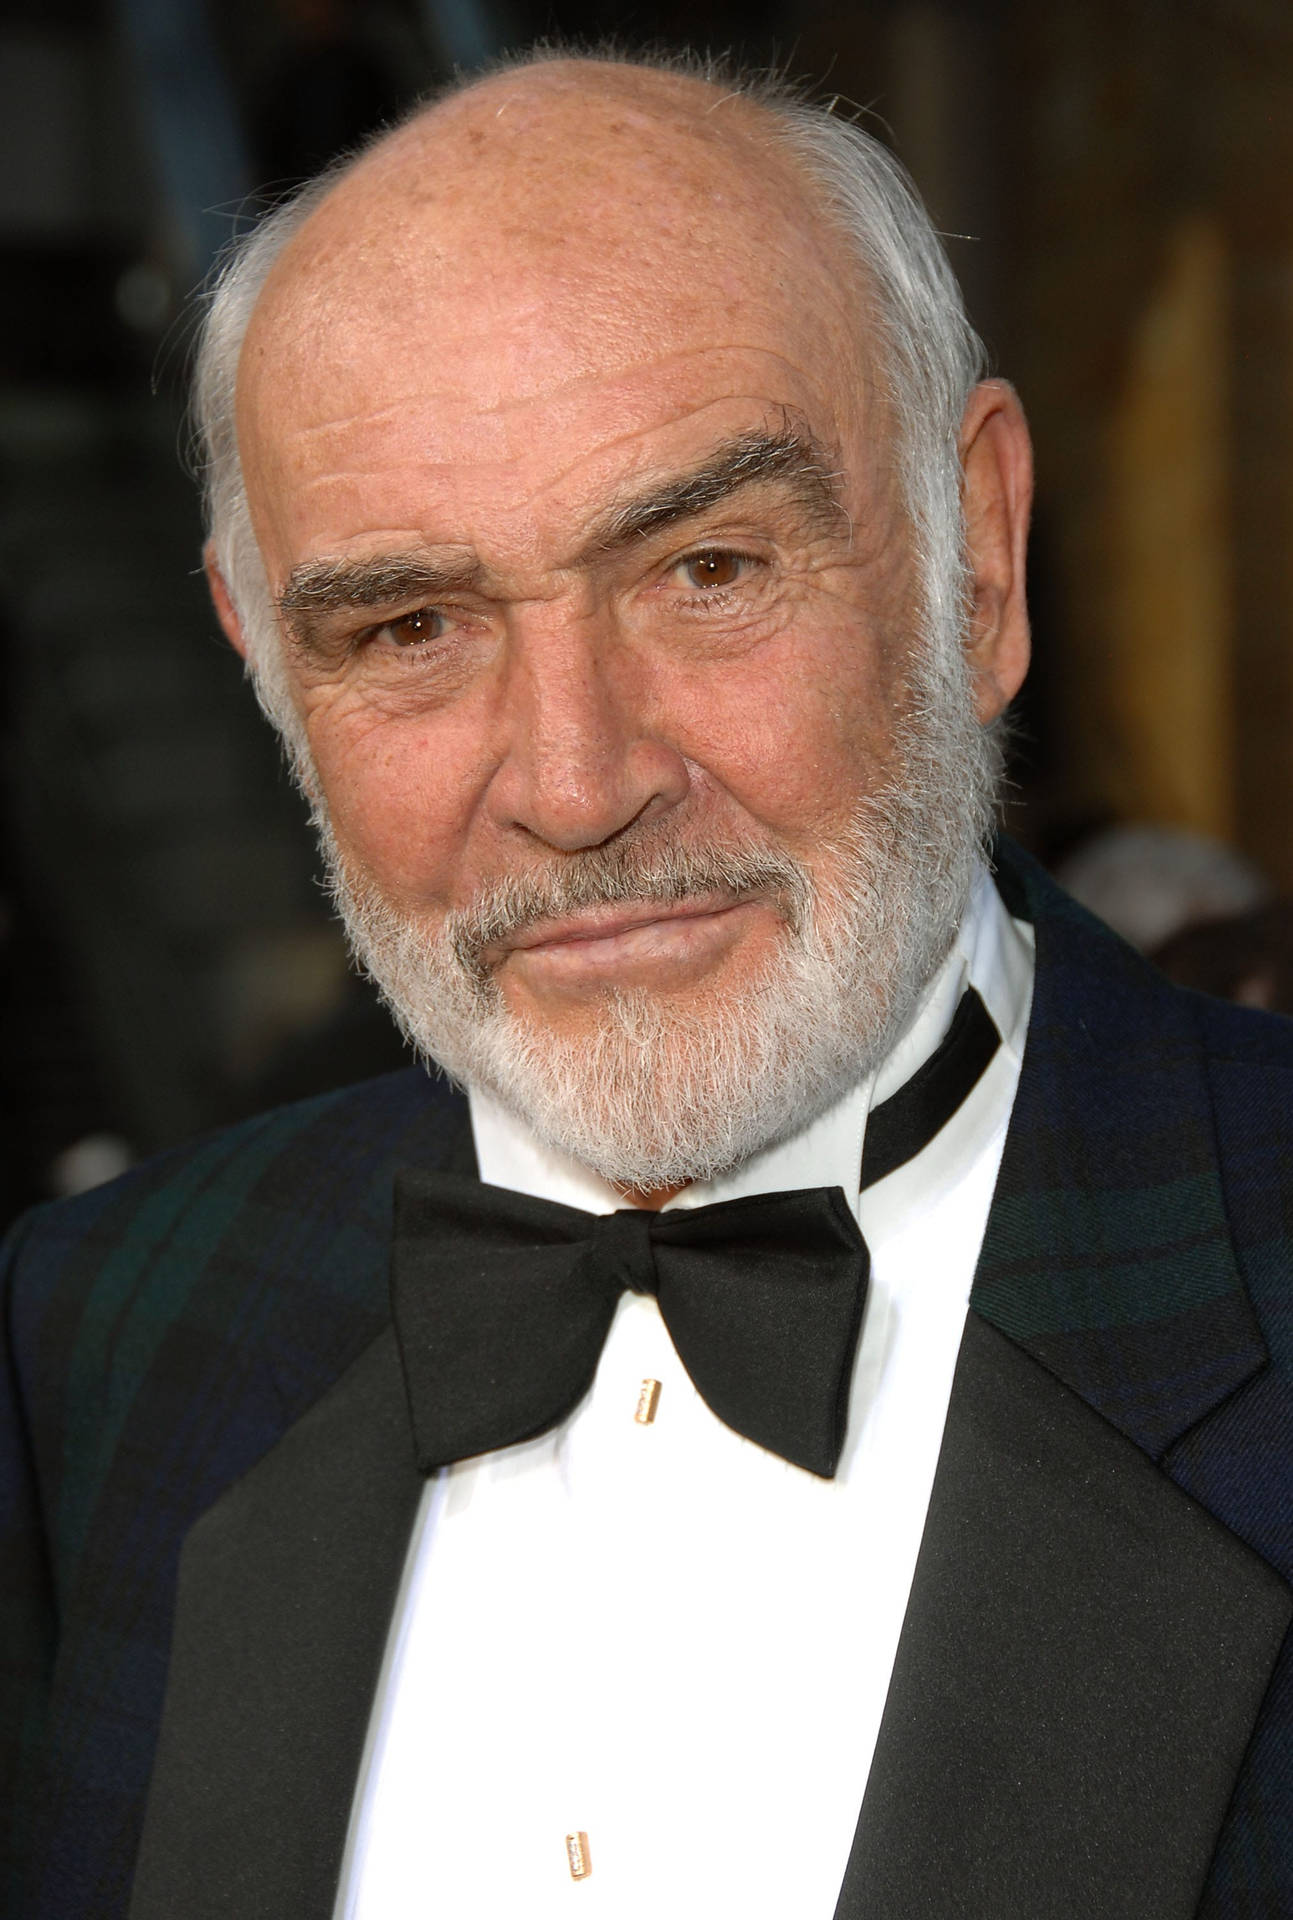 Actor Sean Connery In Suit